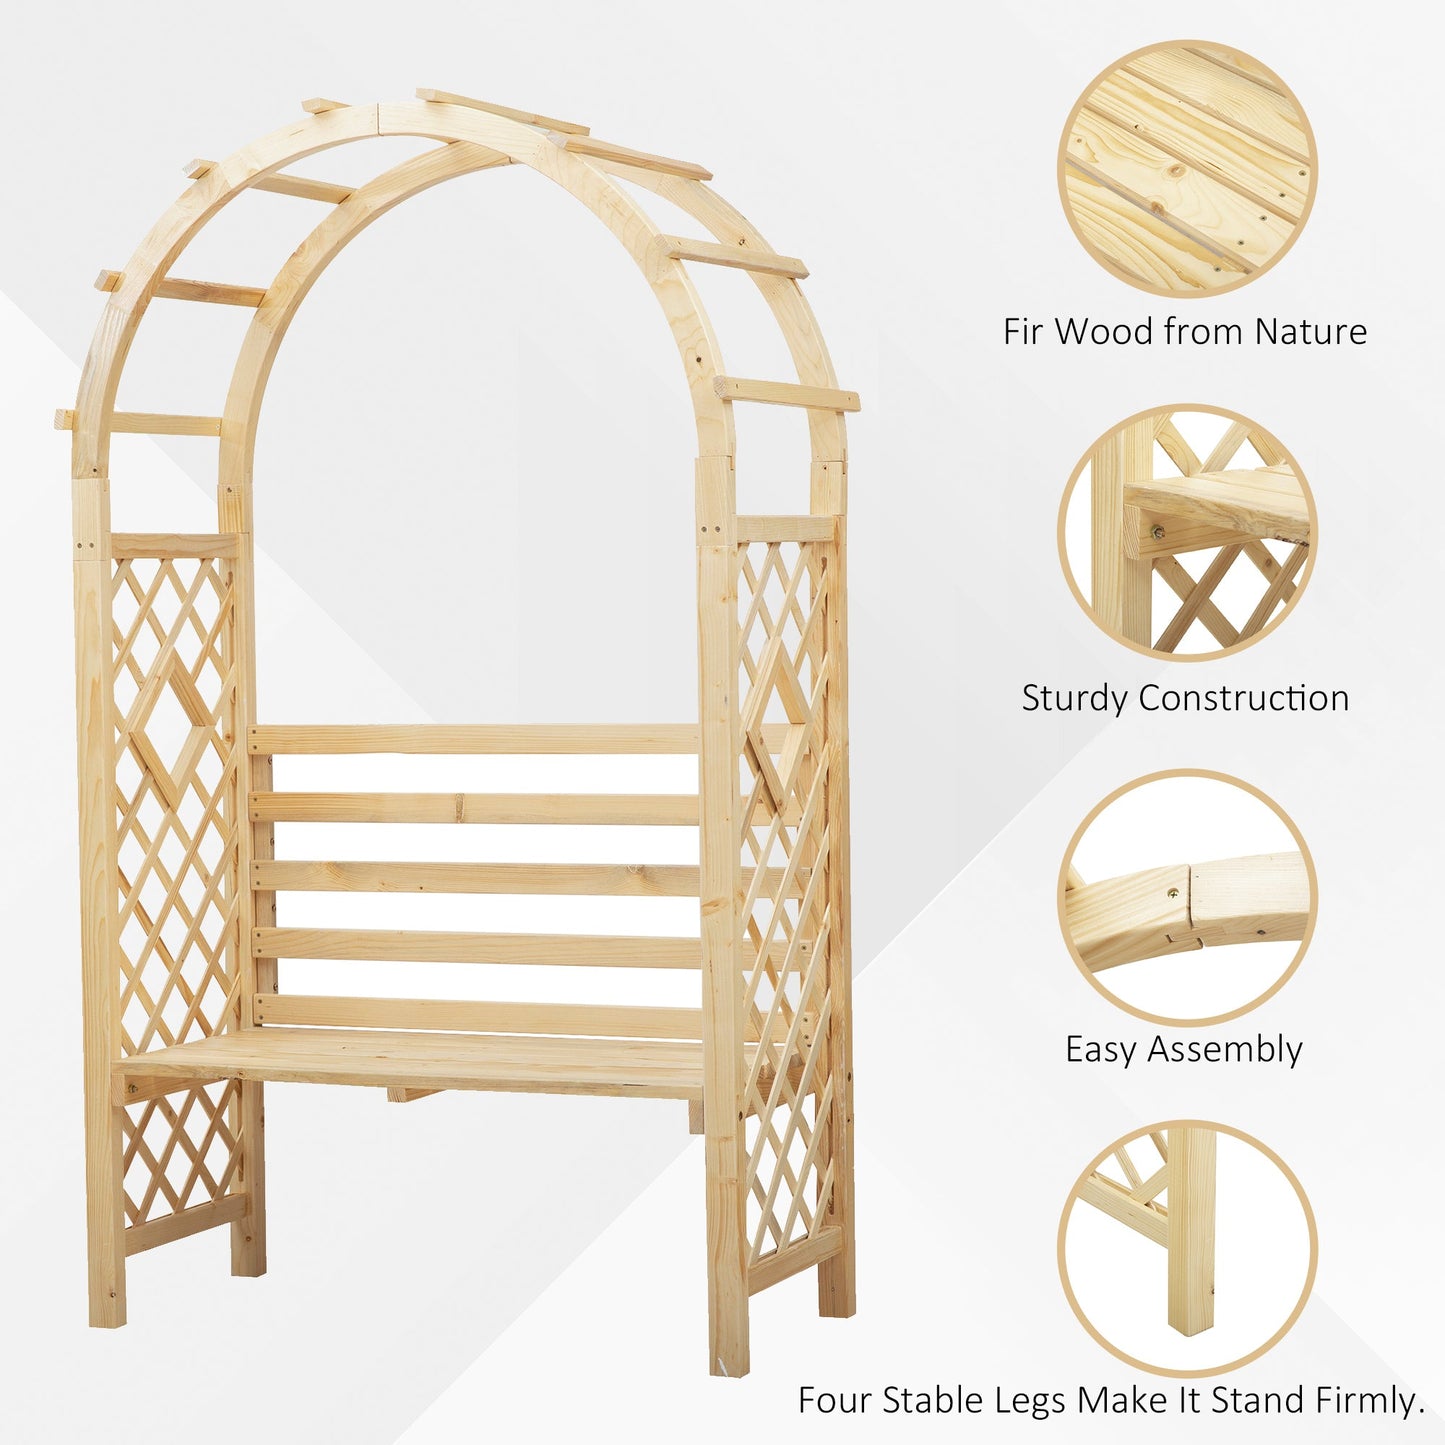 Outdoor and Garden-Wood Garden Arch with Bench Pergola Trellis for Vines/Climbing Plants, Perfect for the Backyard & Outdoor Space - Outdoor Style Company